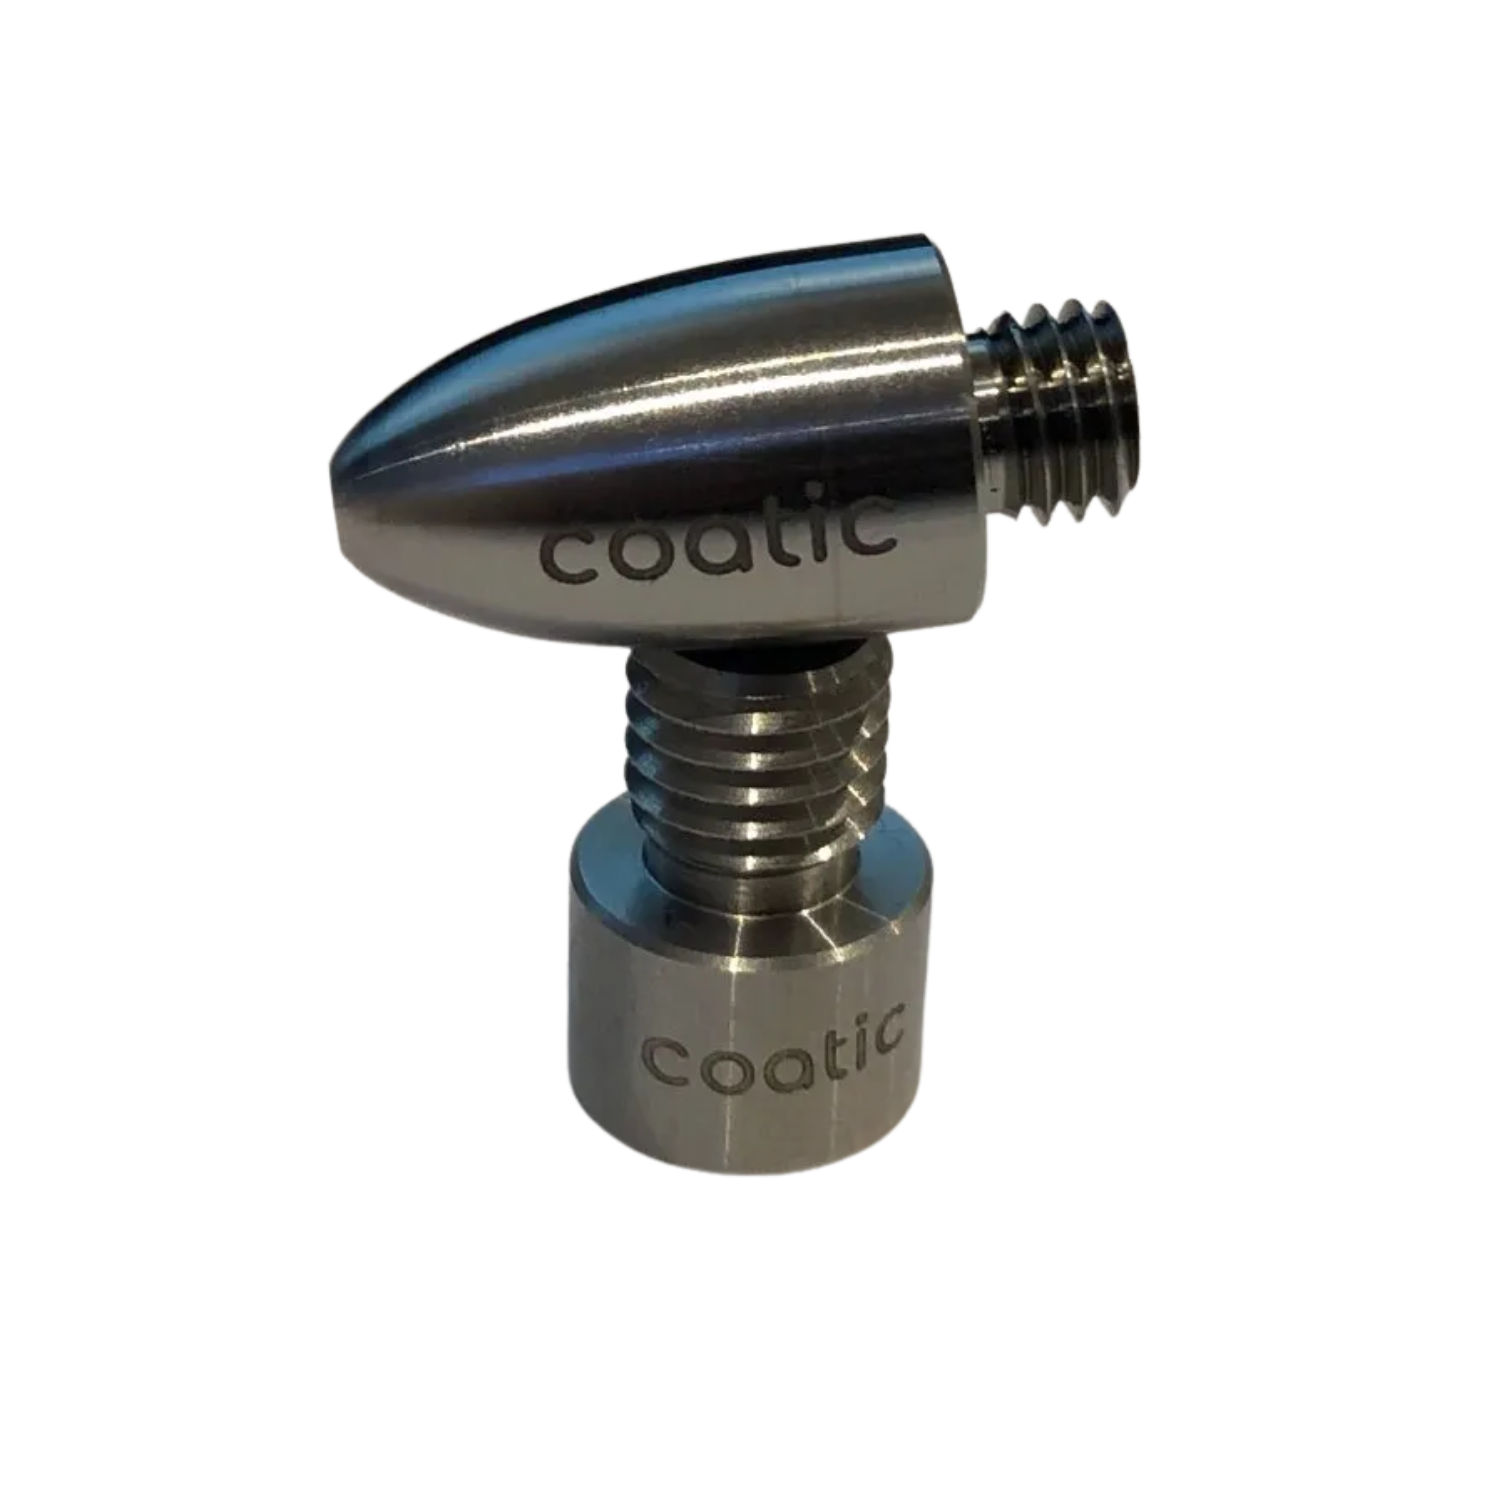 Cone attachment for Coatic© Flex pxe80 and Coatic Rupes Extensions